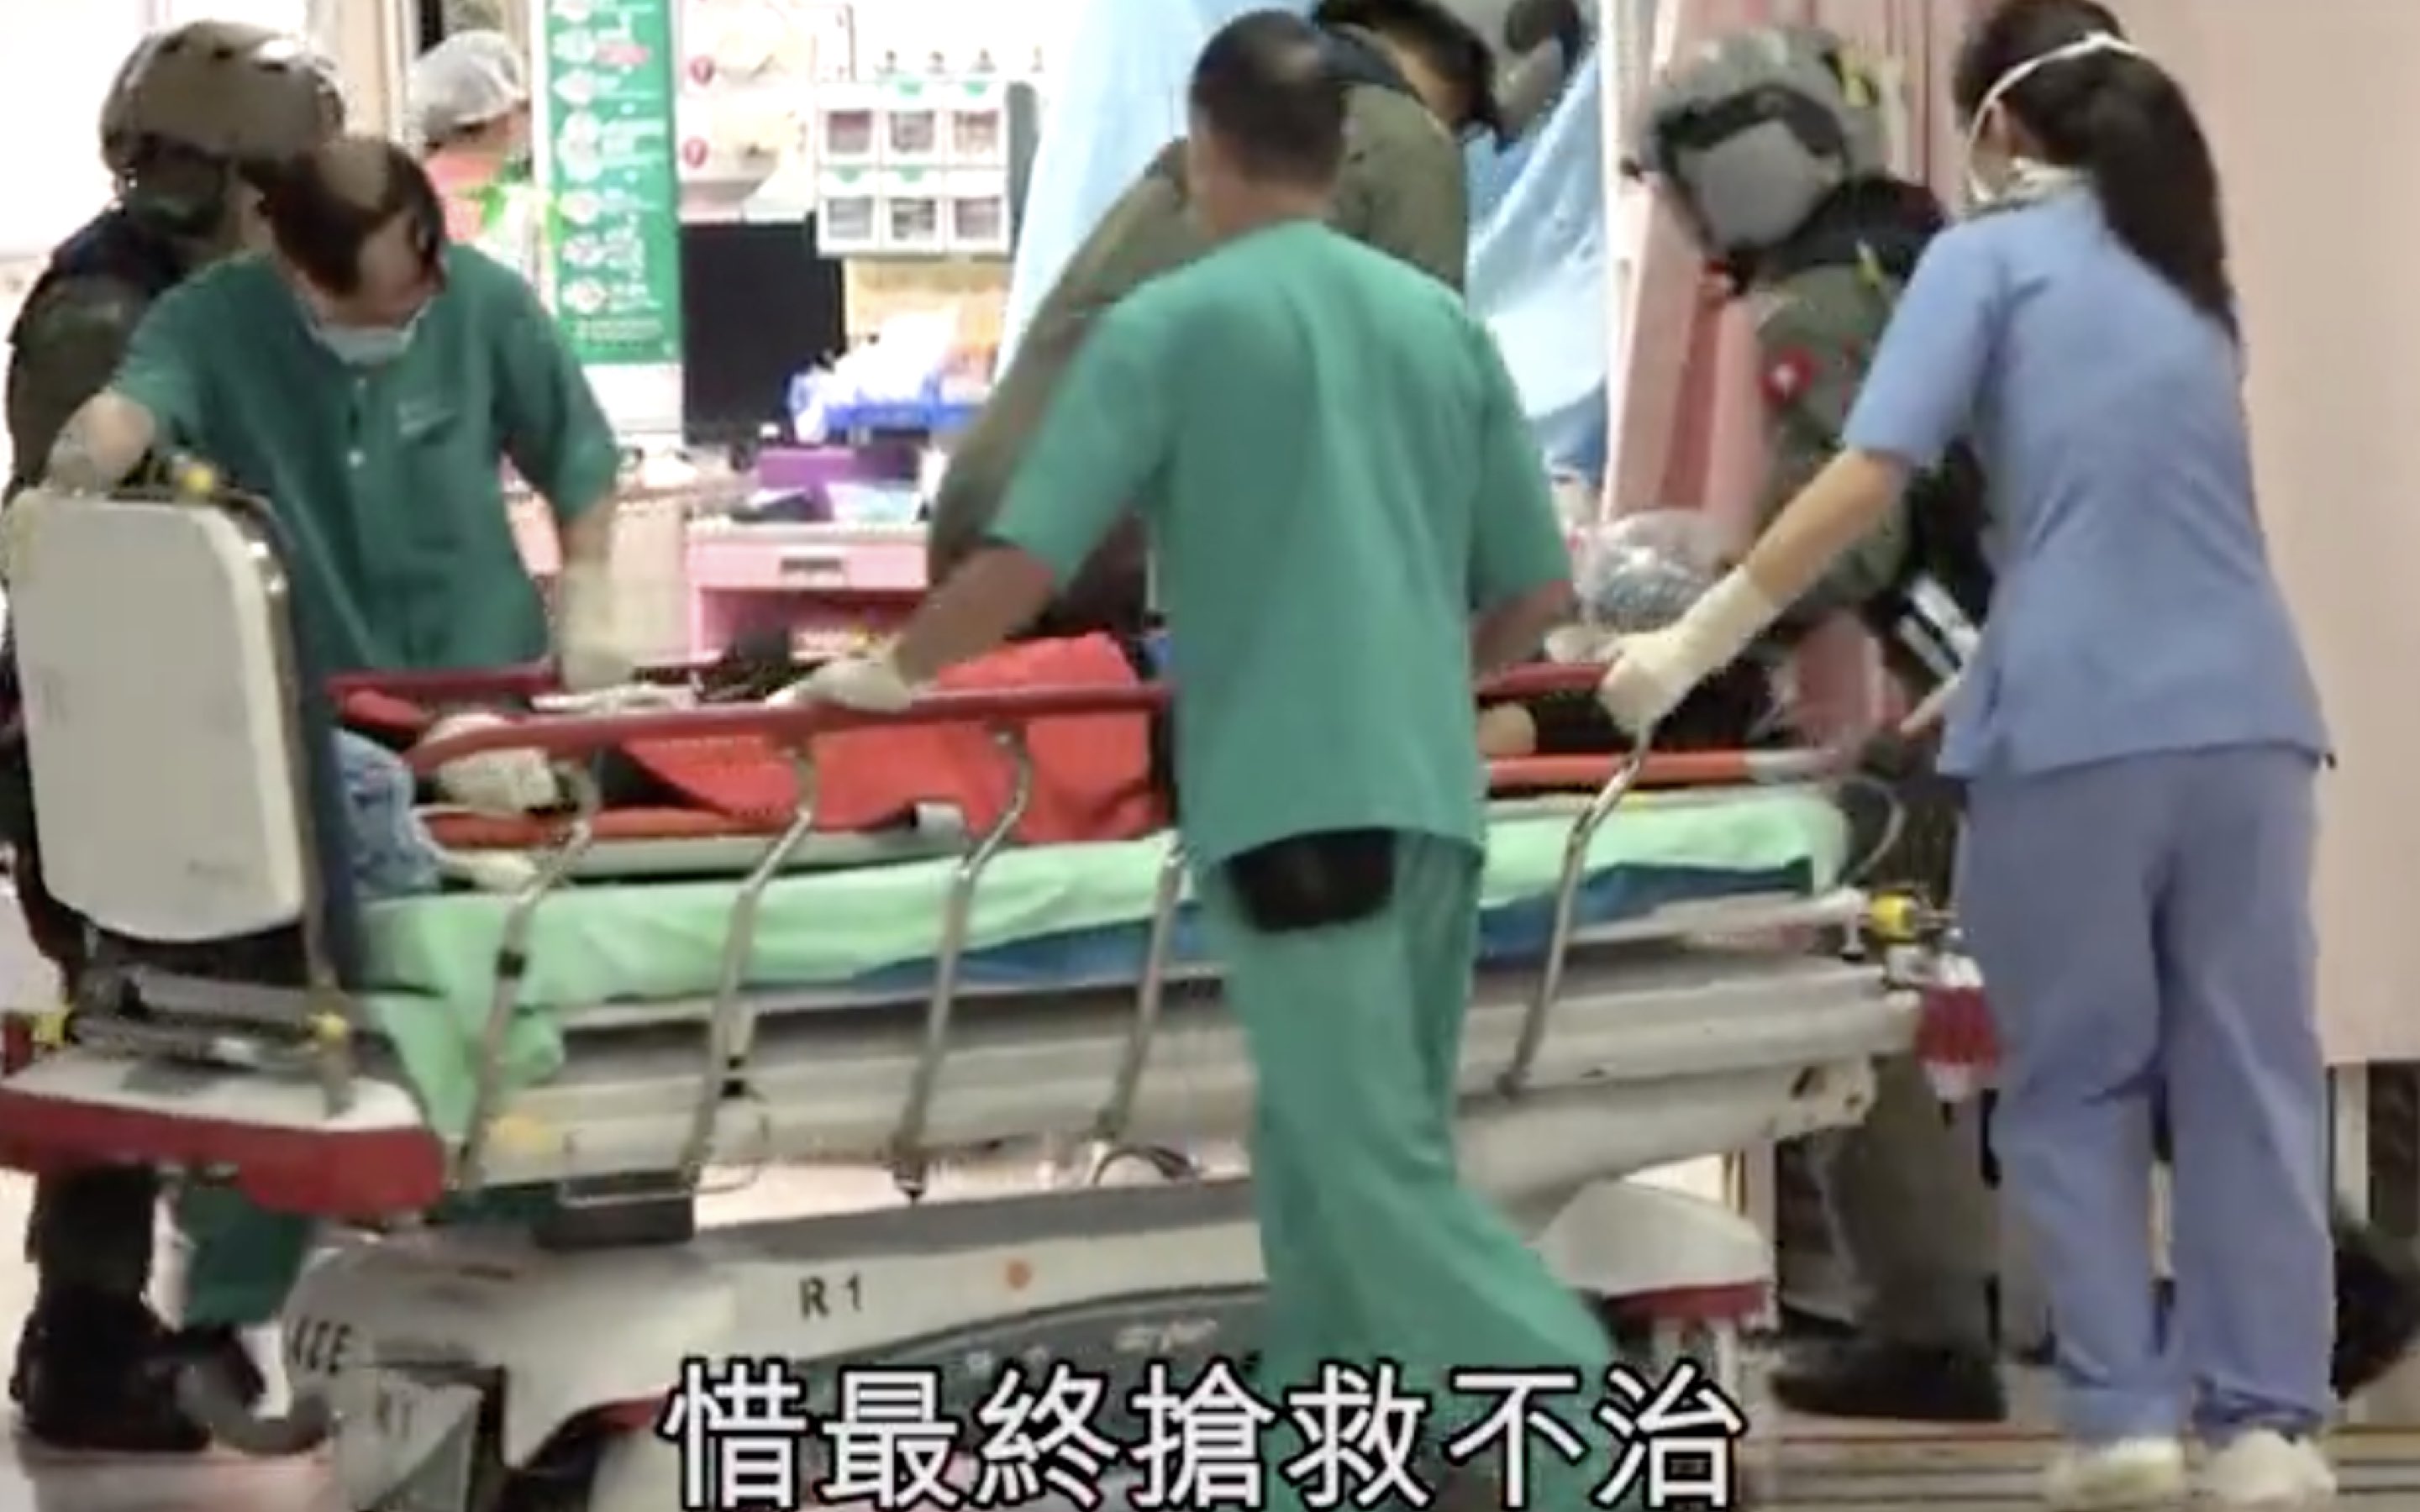 Emergency services staff try to resuscitate a 42-year-old female hiker who slipped and fell 15 meters during a hike on Lantau Peak. Screengran via Apple Daily video.